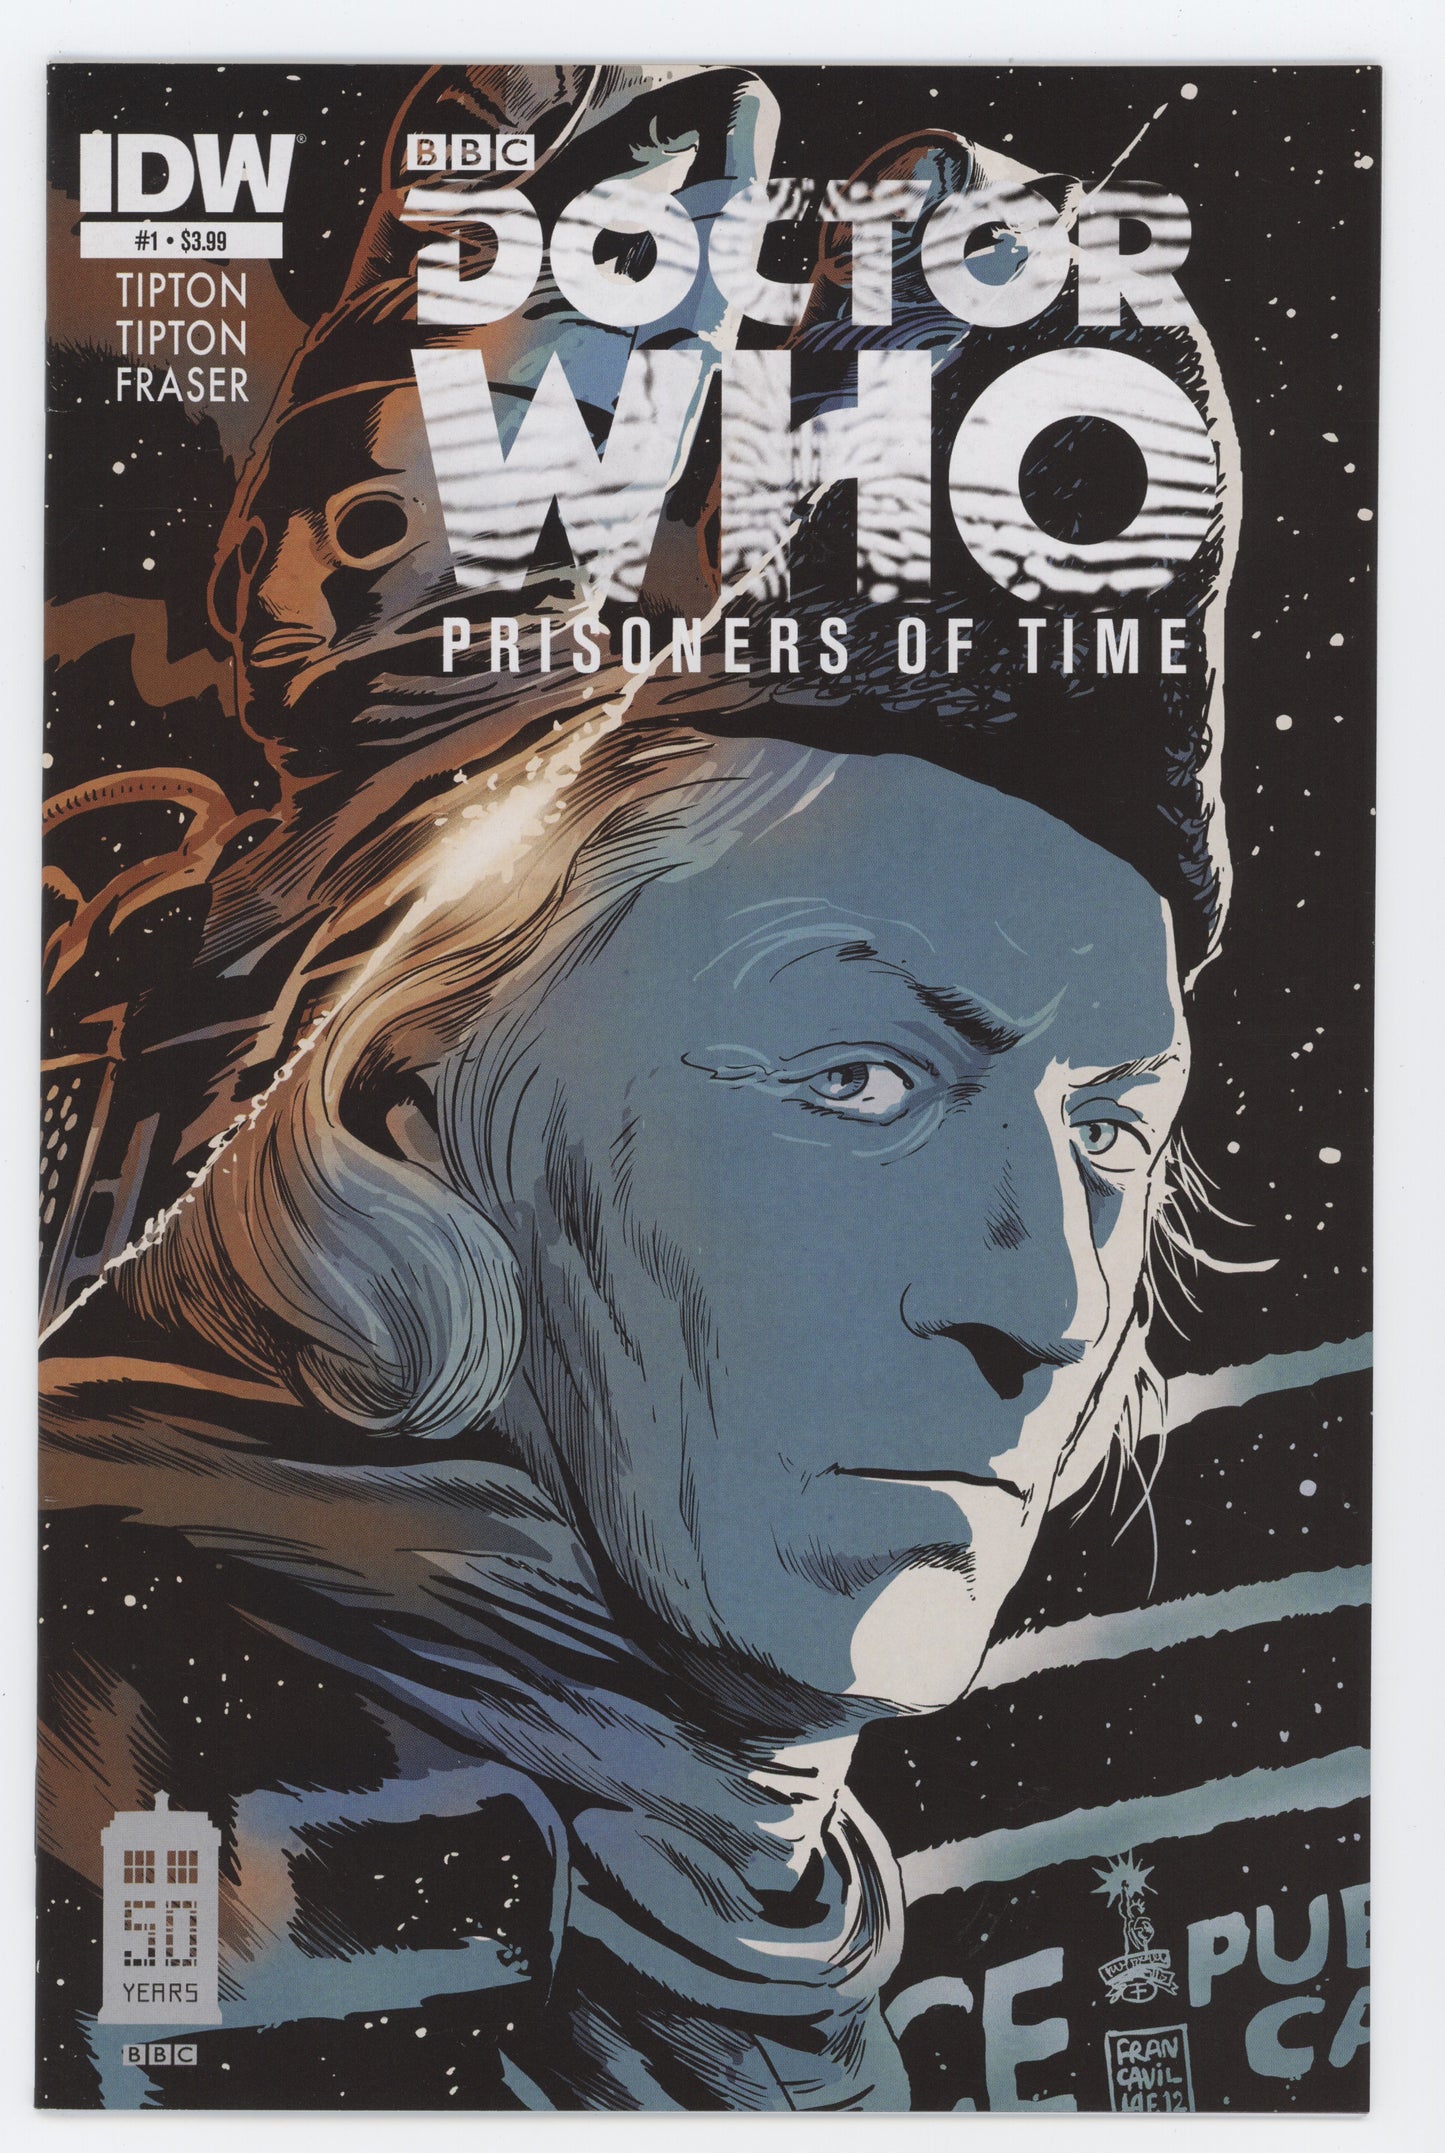 Doctor Who Prisoners Of Time #1 A (Of 12) IDW 2013 Francesco Francavilla